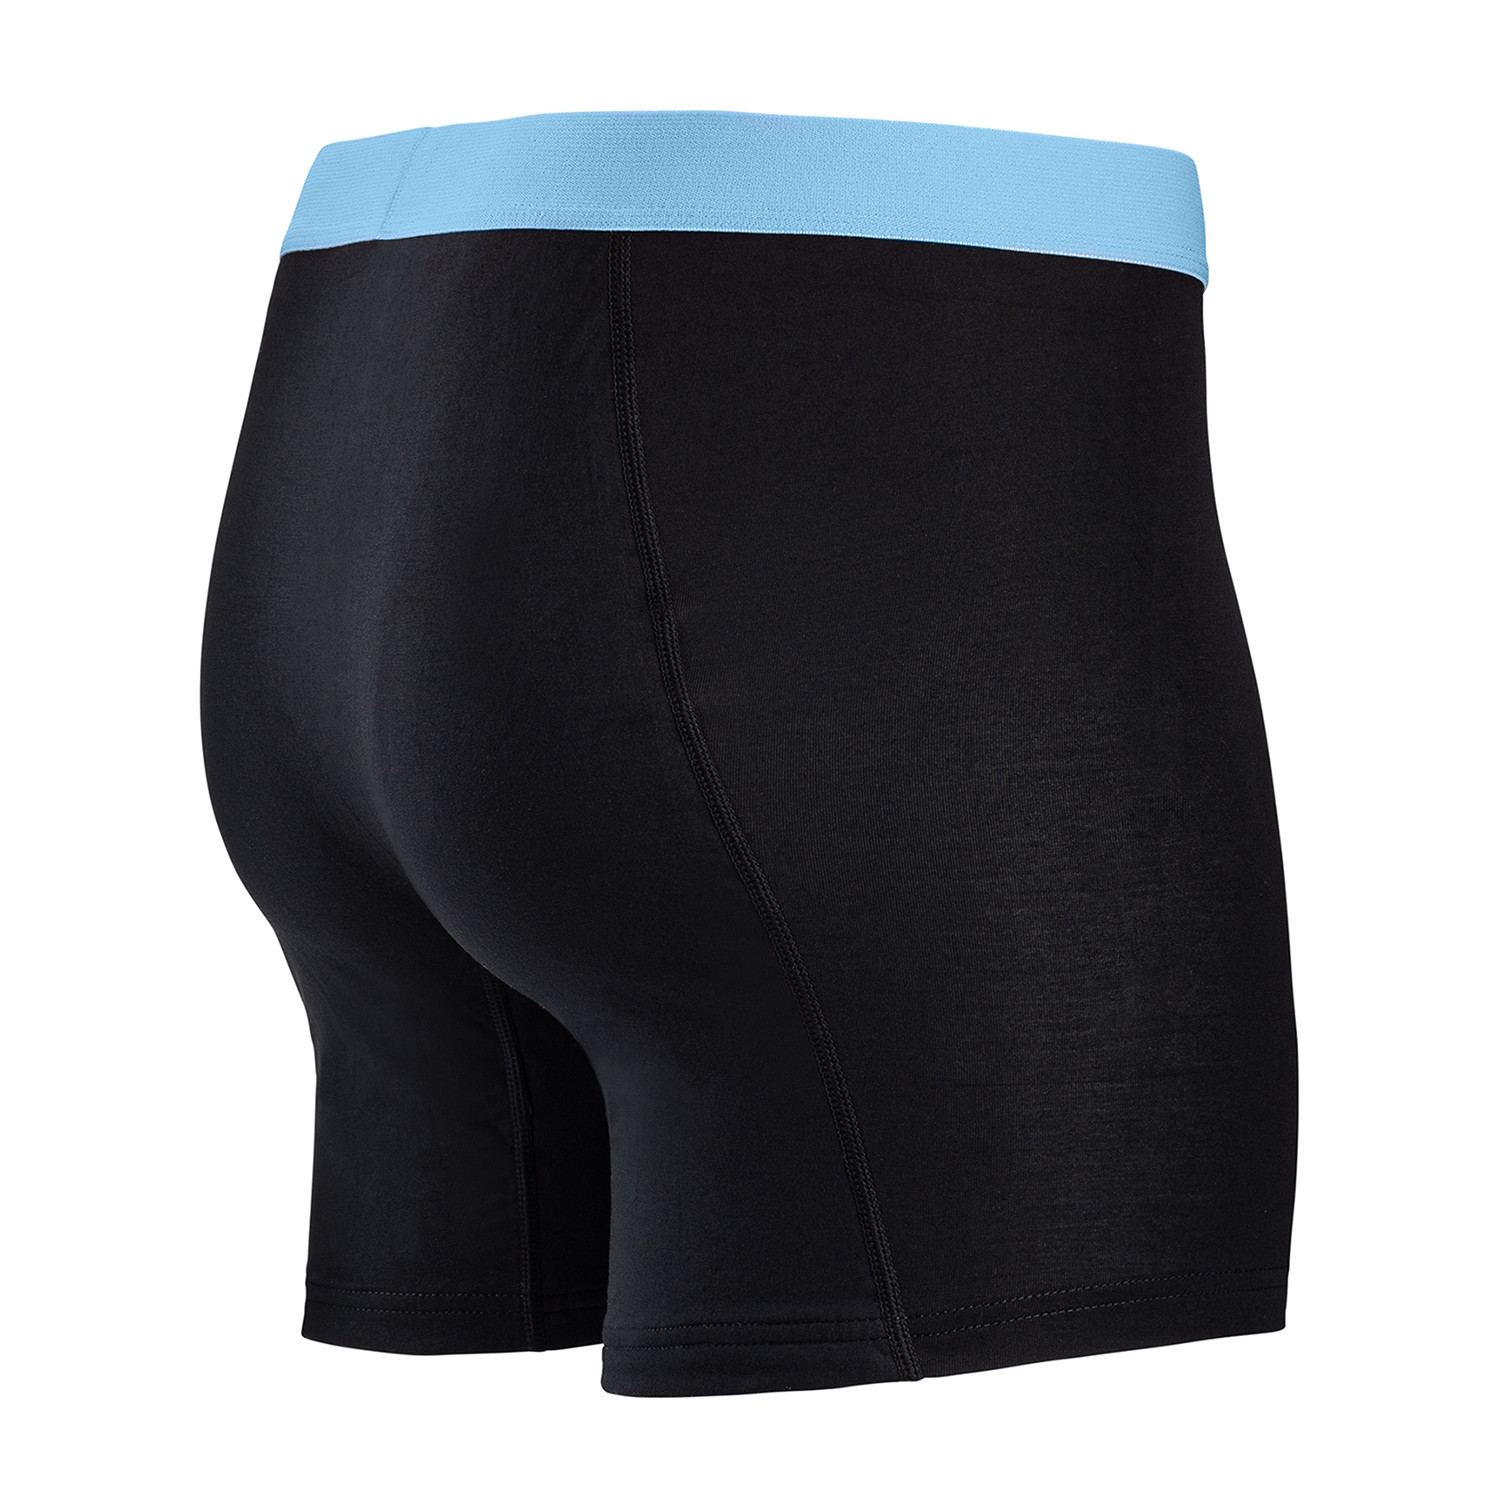 Ejis sweat proof boxer briefs have got you covered where you need it most…  below the belt. And as you can see, they look exactly like regular underwear